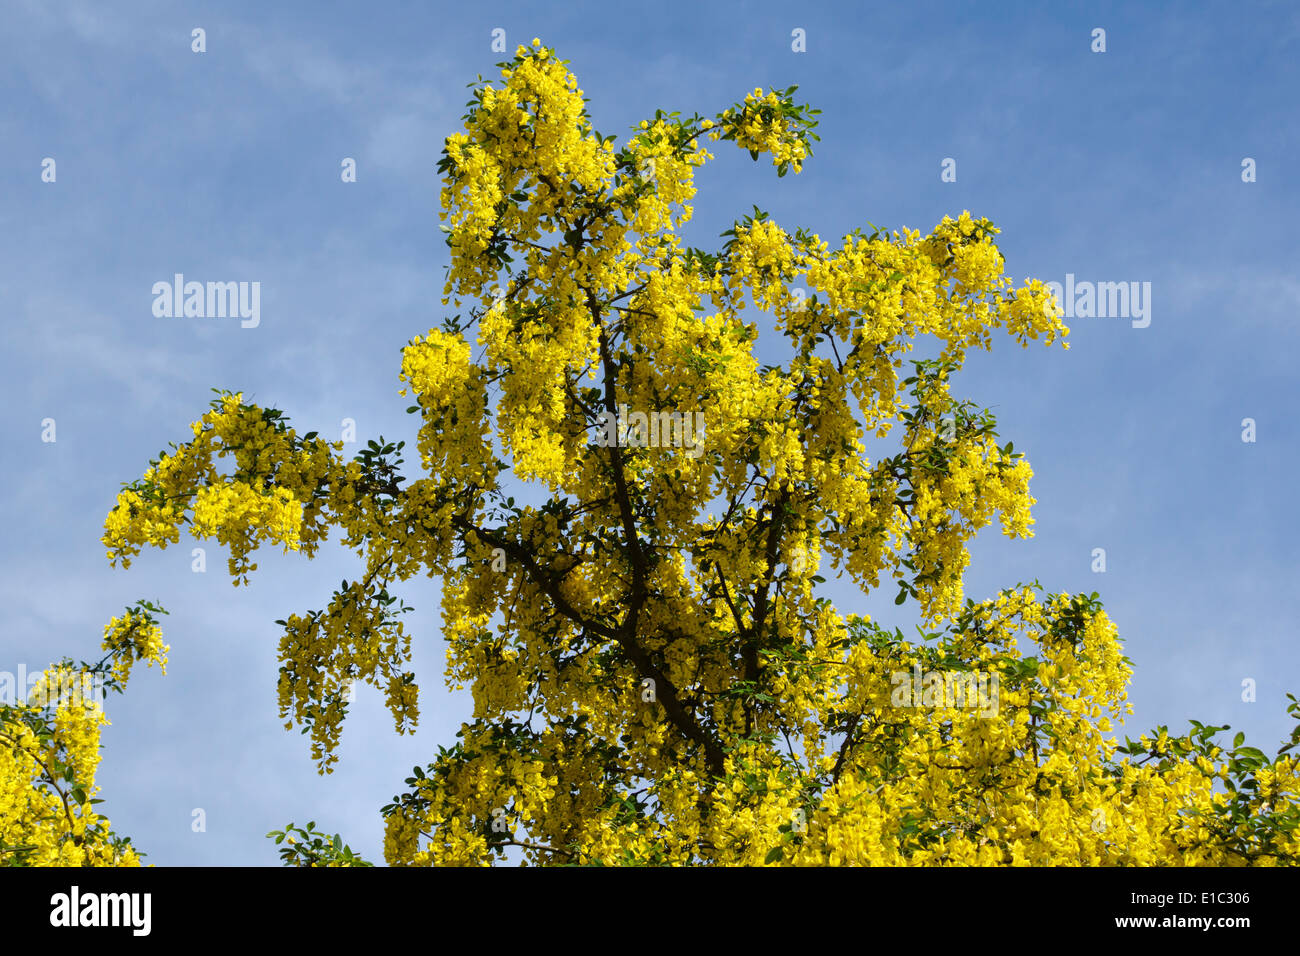 A laburnum tree (Laburnum anagyroides, also known as golden chain) in full bloom in early summer, UK Stock Photo